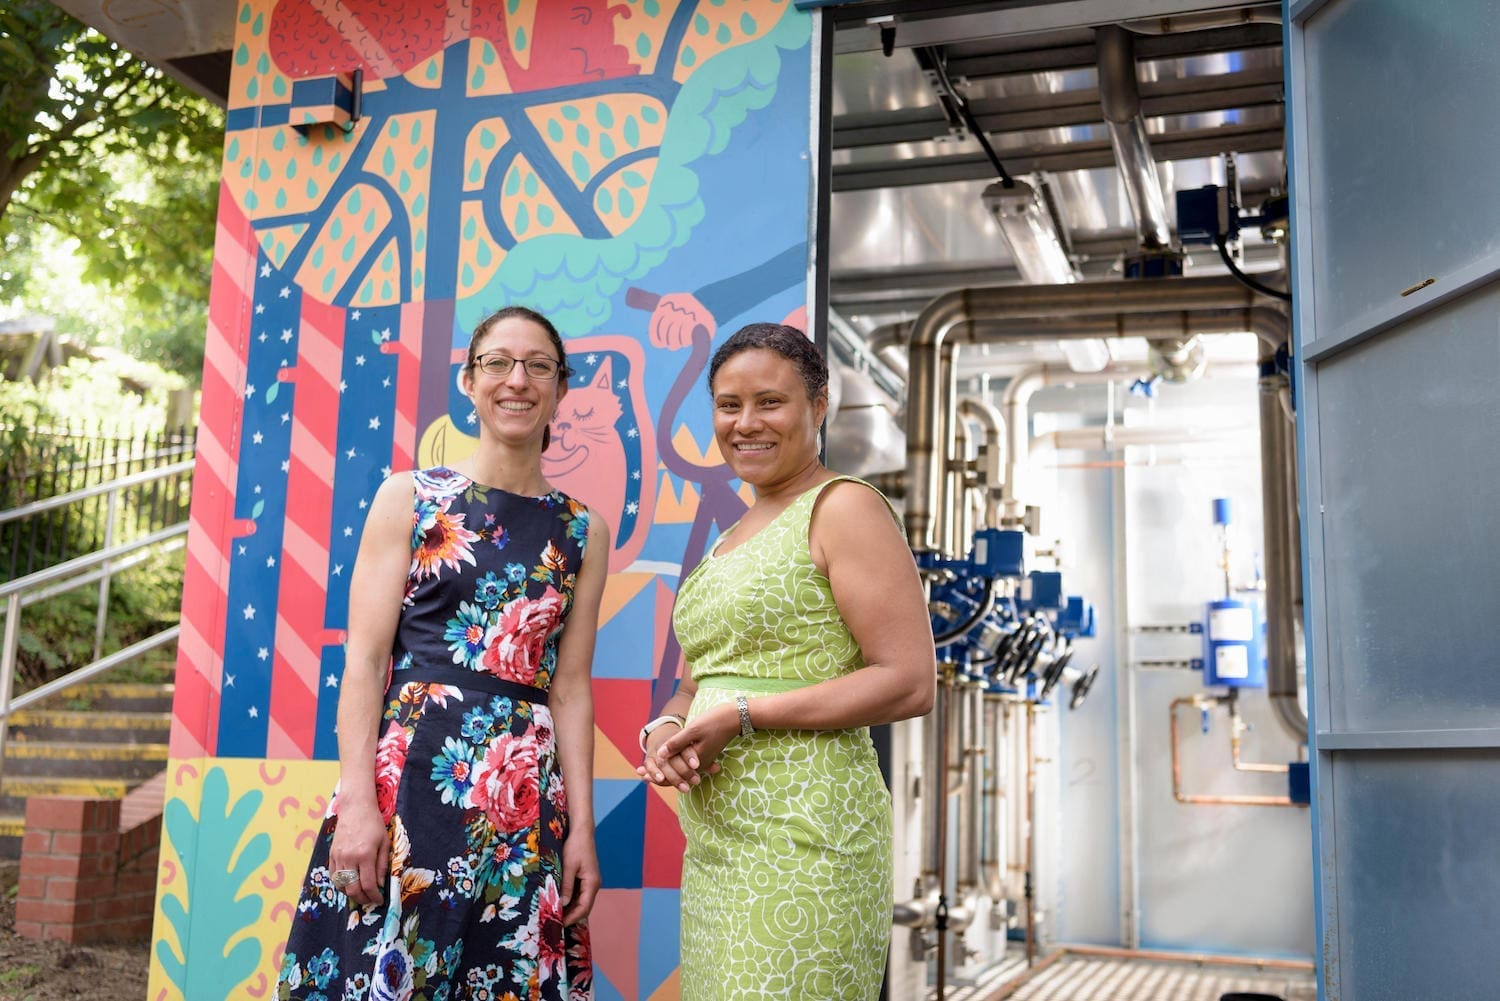 Two women standing in front of a pumping station in the middle of an urban setting. The outside of the pumping station is painted with cool artwork. One  woman is wearing a blue  floral dress and glasses, the other woman is wearing a green floral dress.